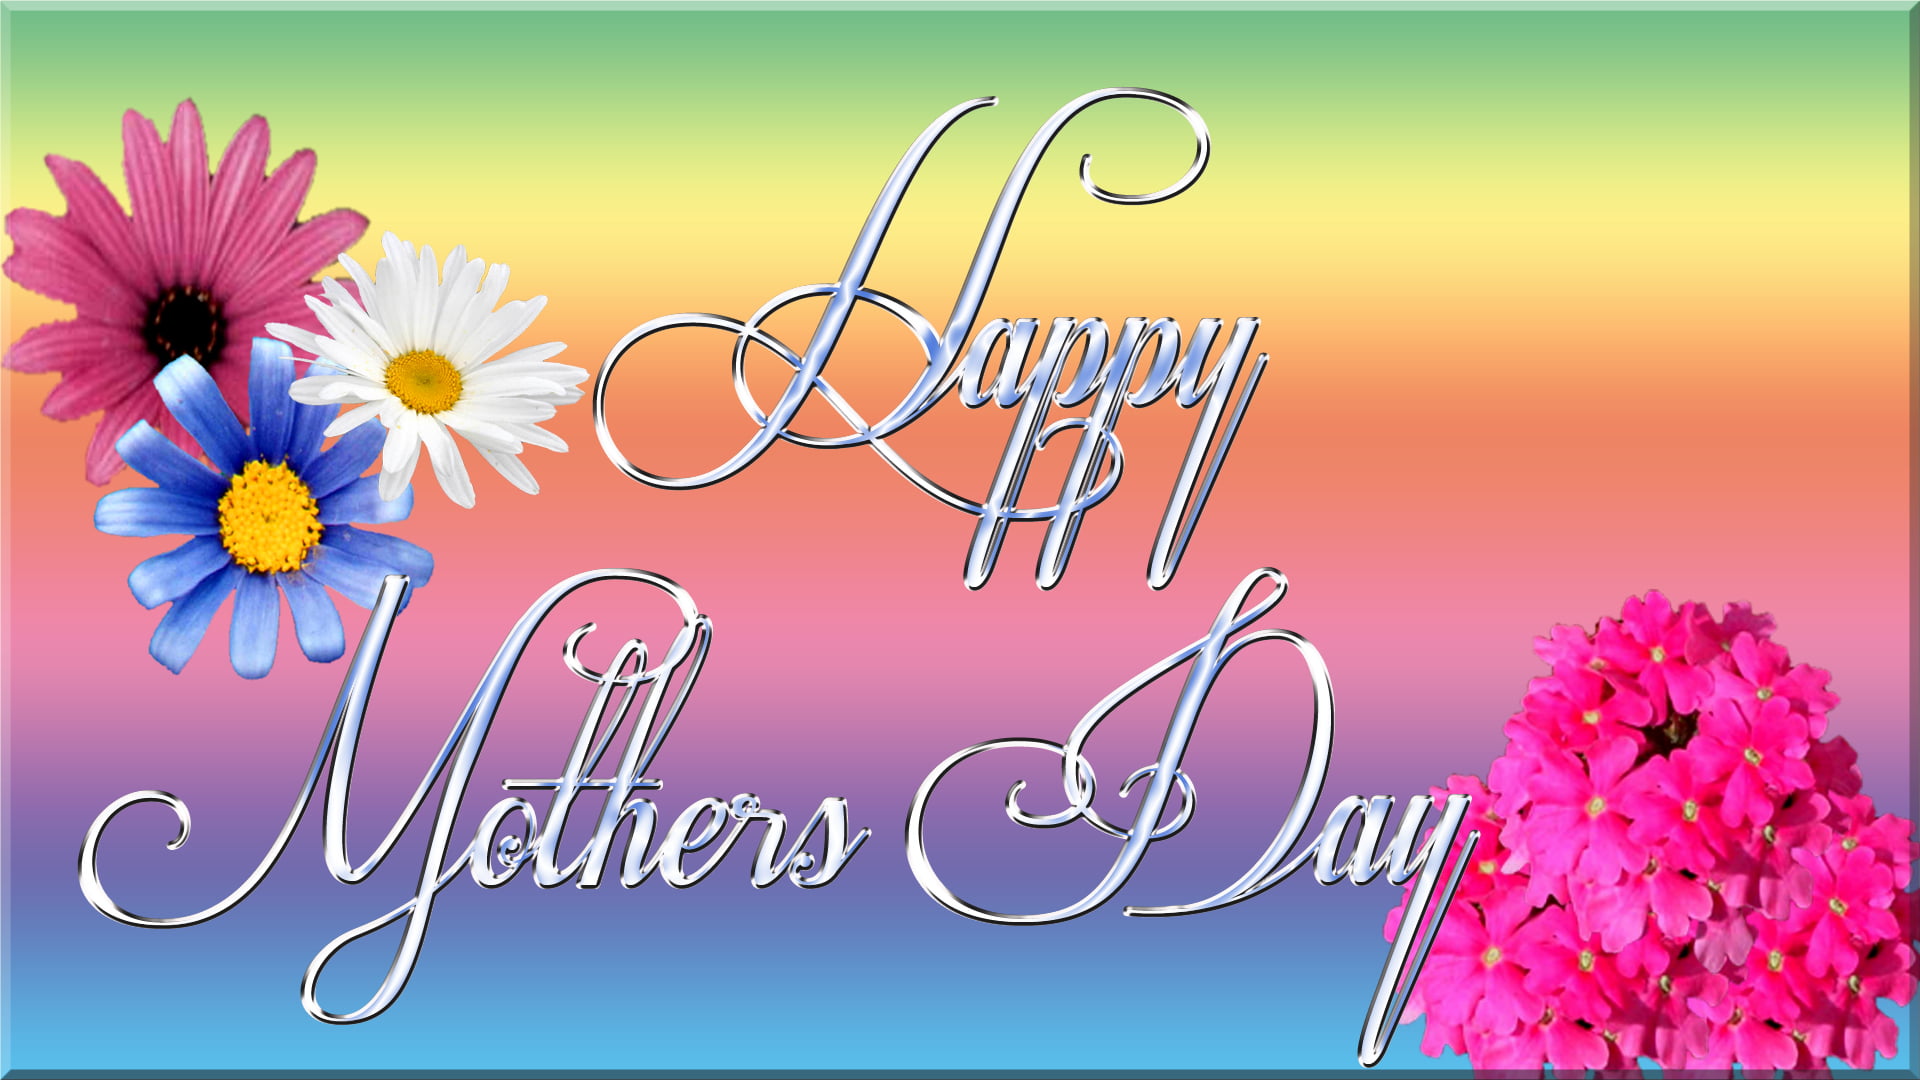 Happy Mothers Day 2018 Quotes Wishes Sayings One Liner Wishes Poems 